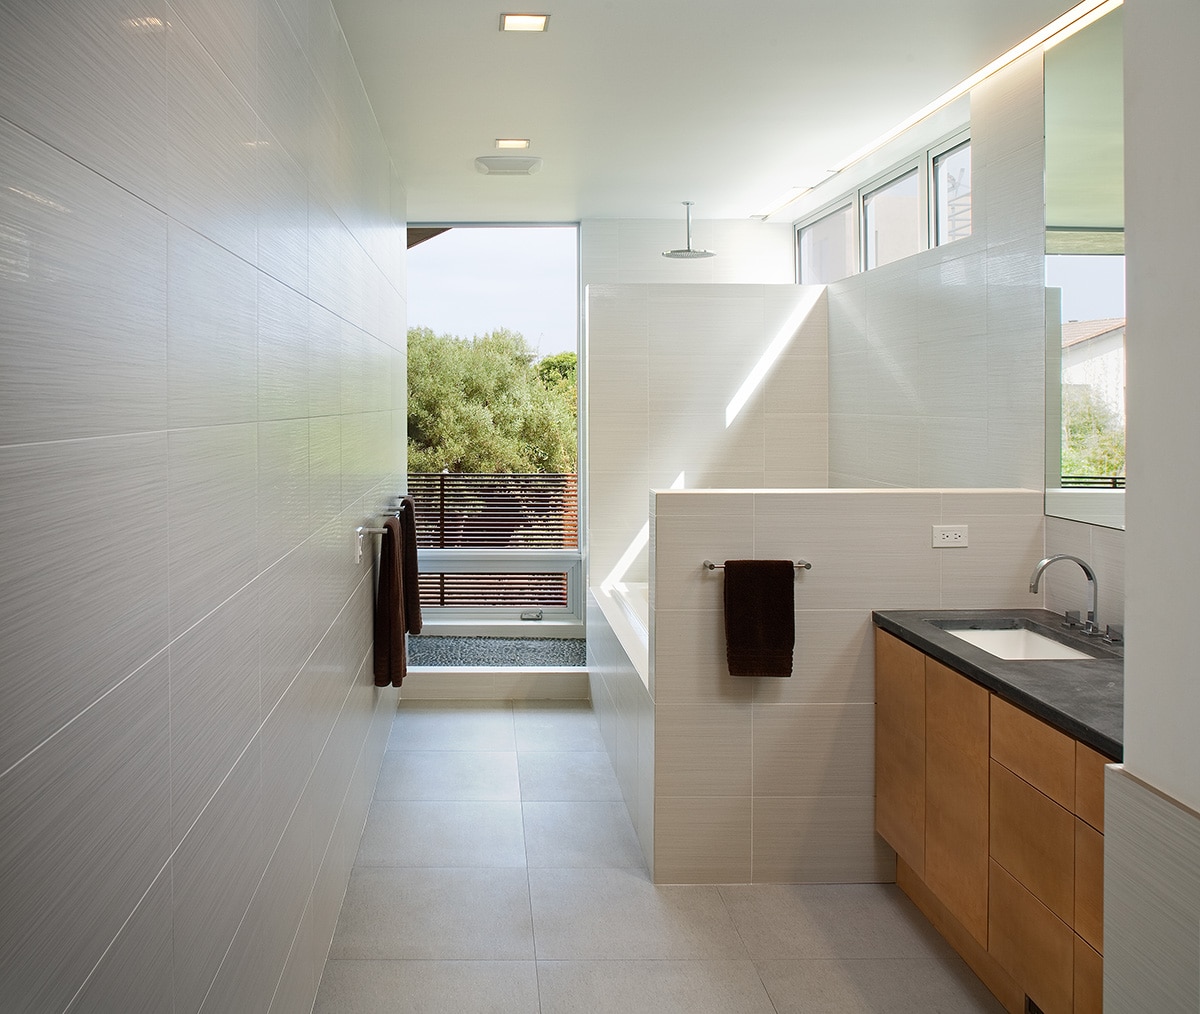 This beautiful fixed- and hinged-window combo in the bathroom lets in tons of natural San Diego light.